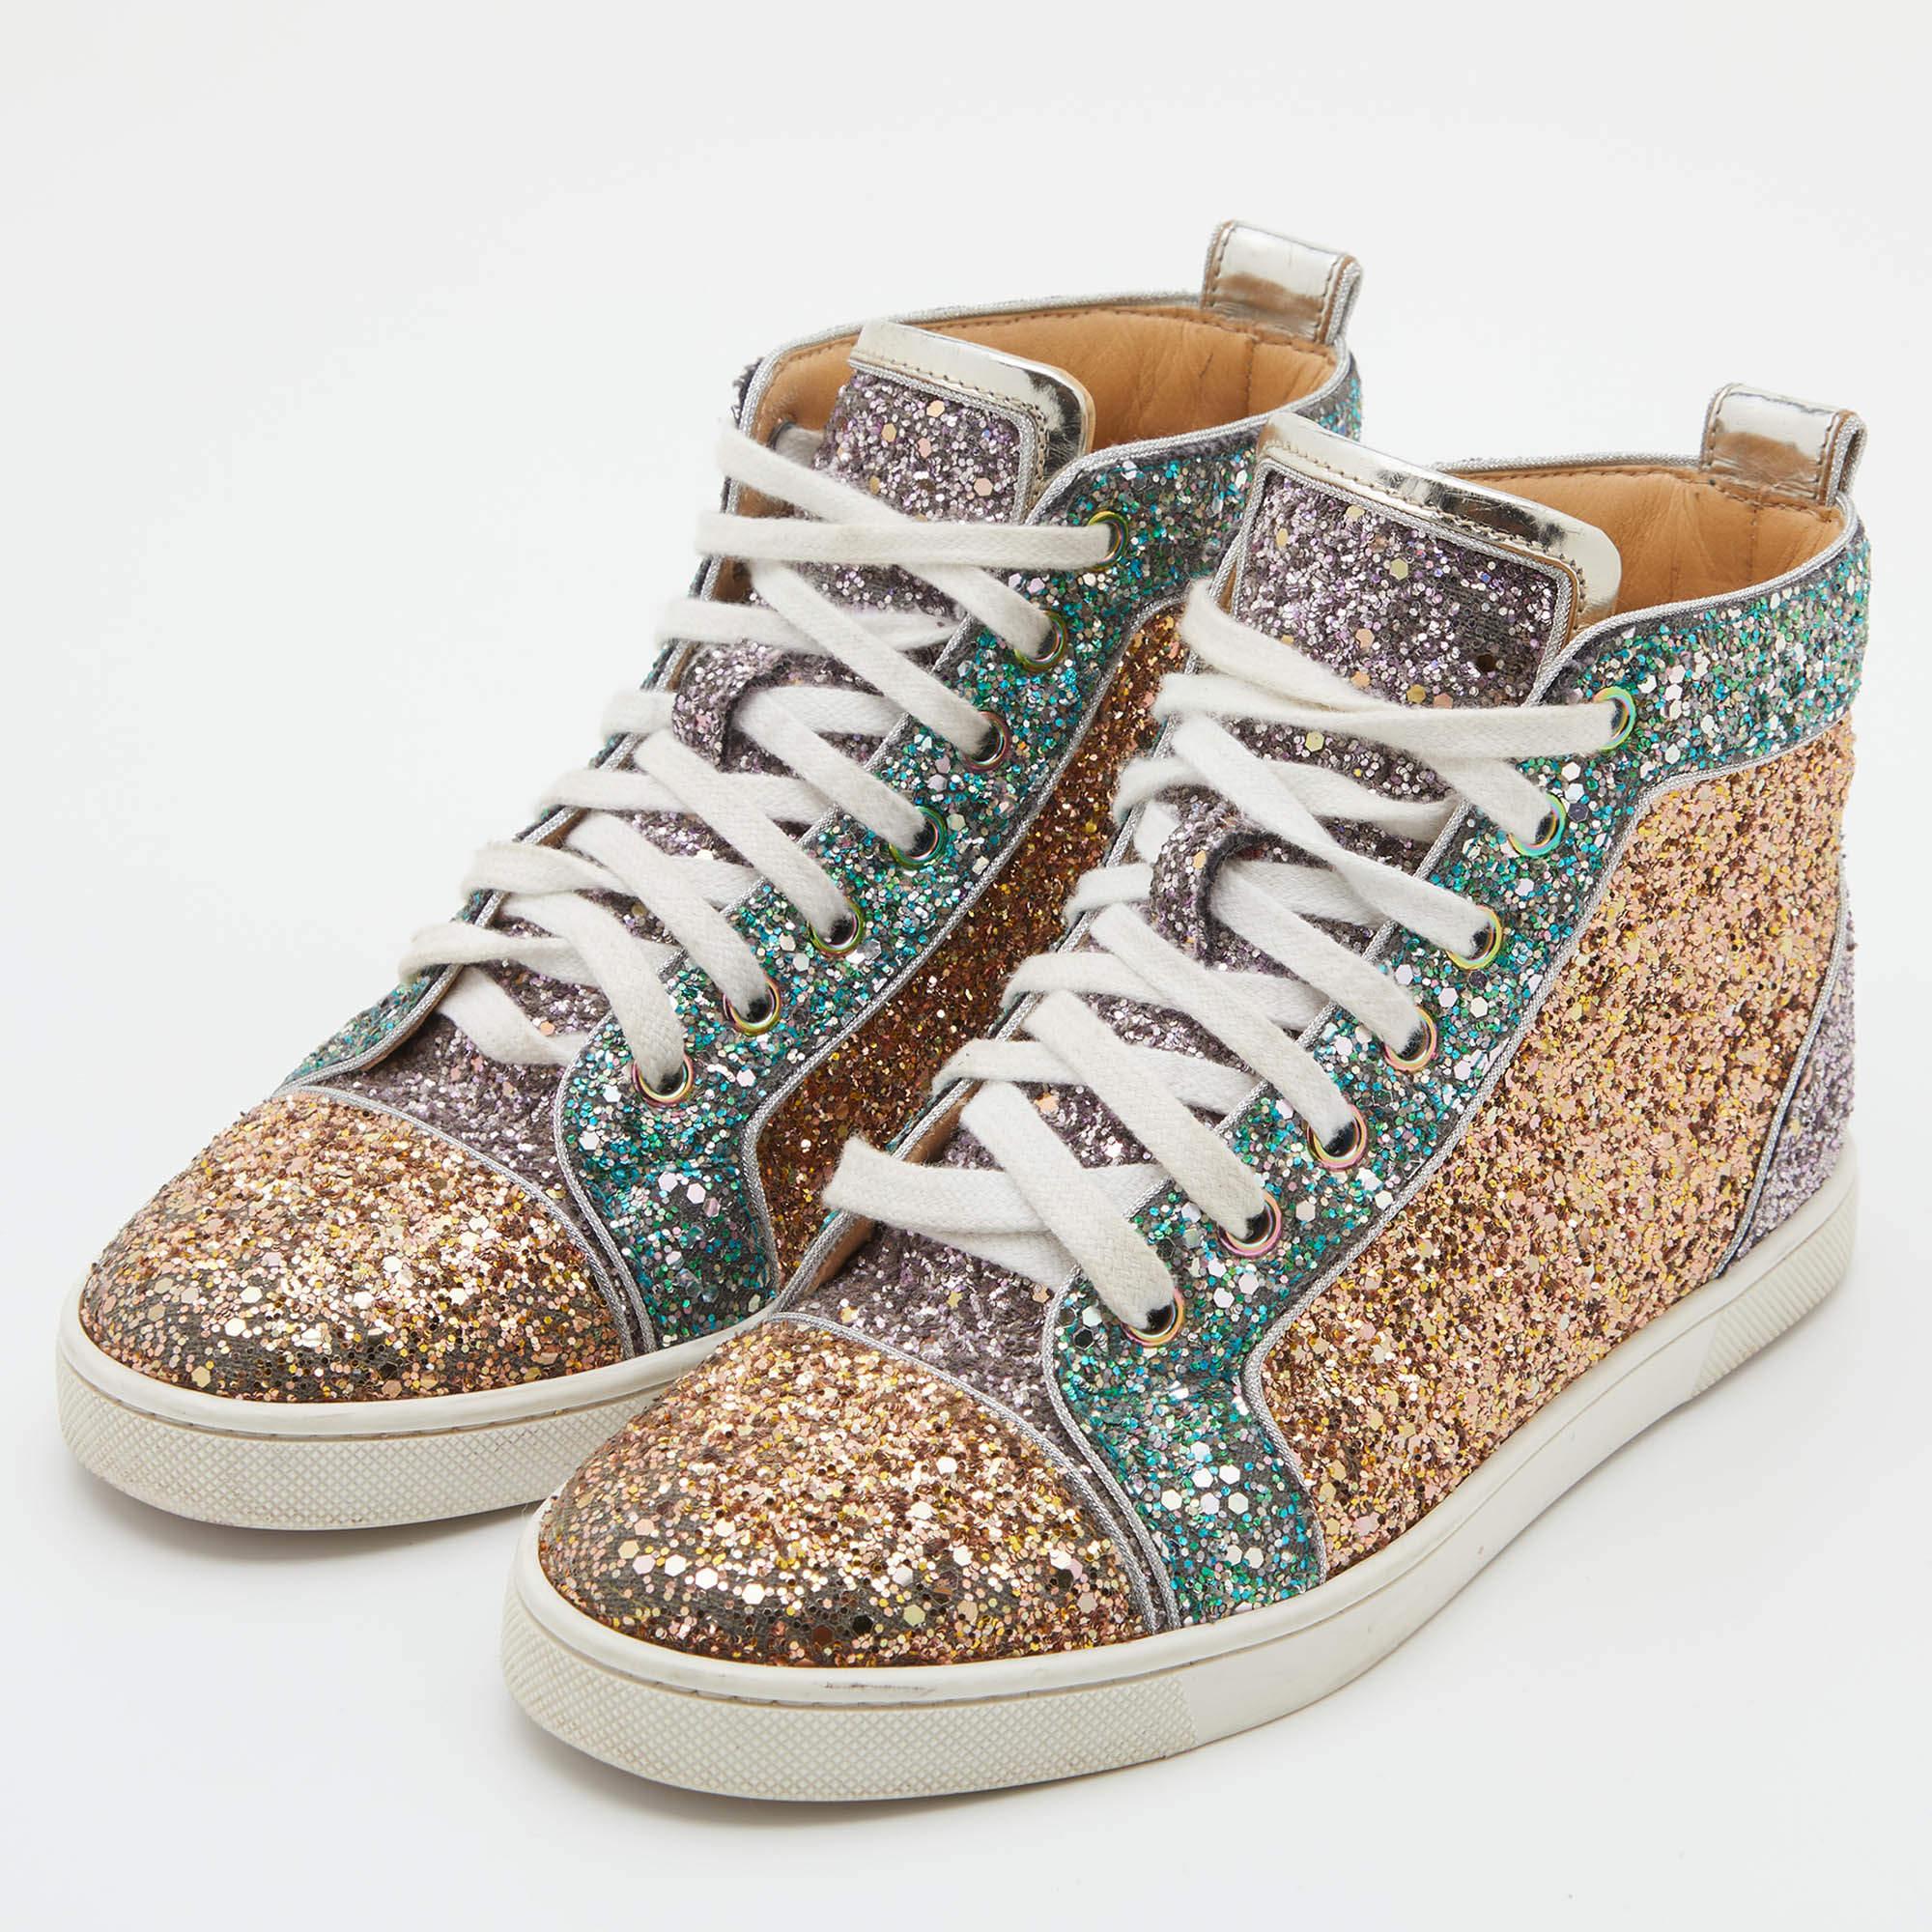 Brown Christian Louboutin Glitter Fabric Bip Bip High Top Sneakers Size 35.5 For Sale